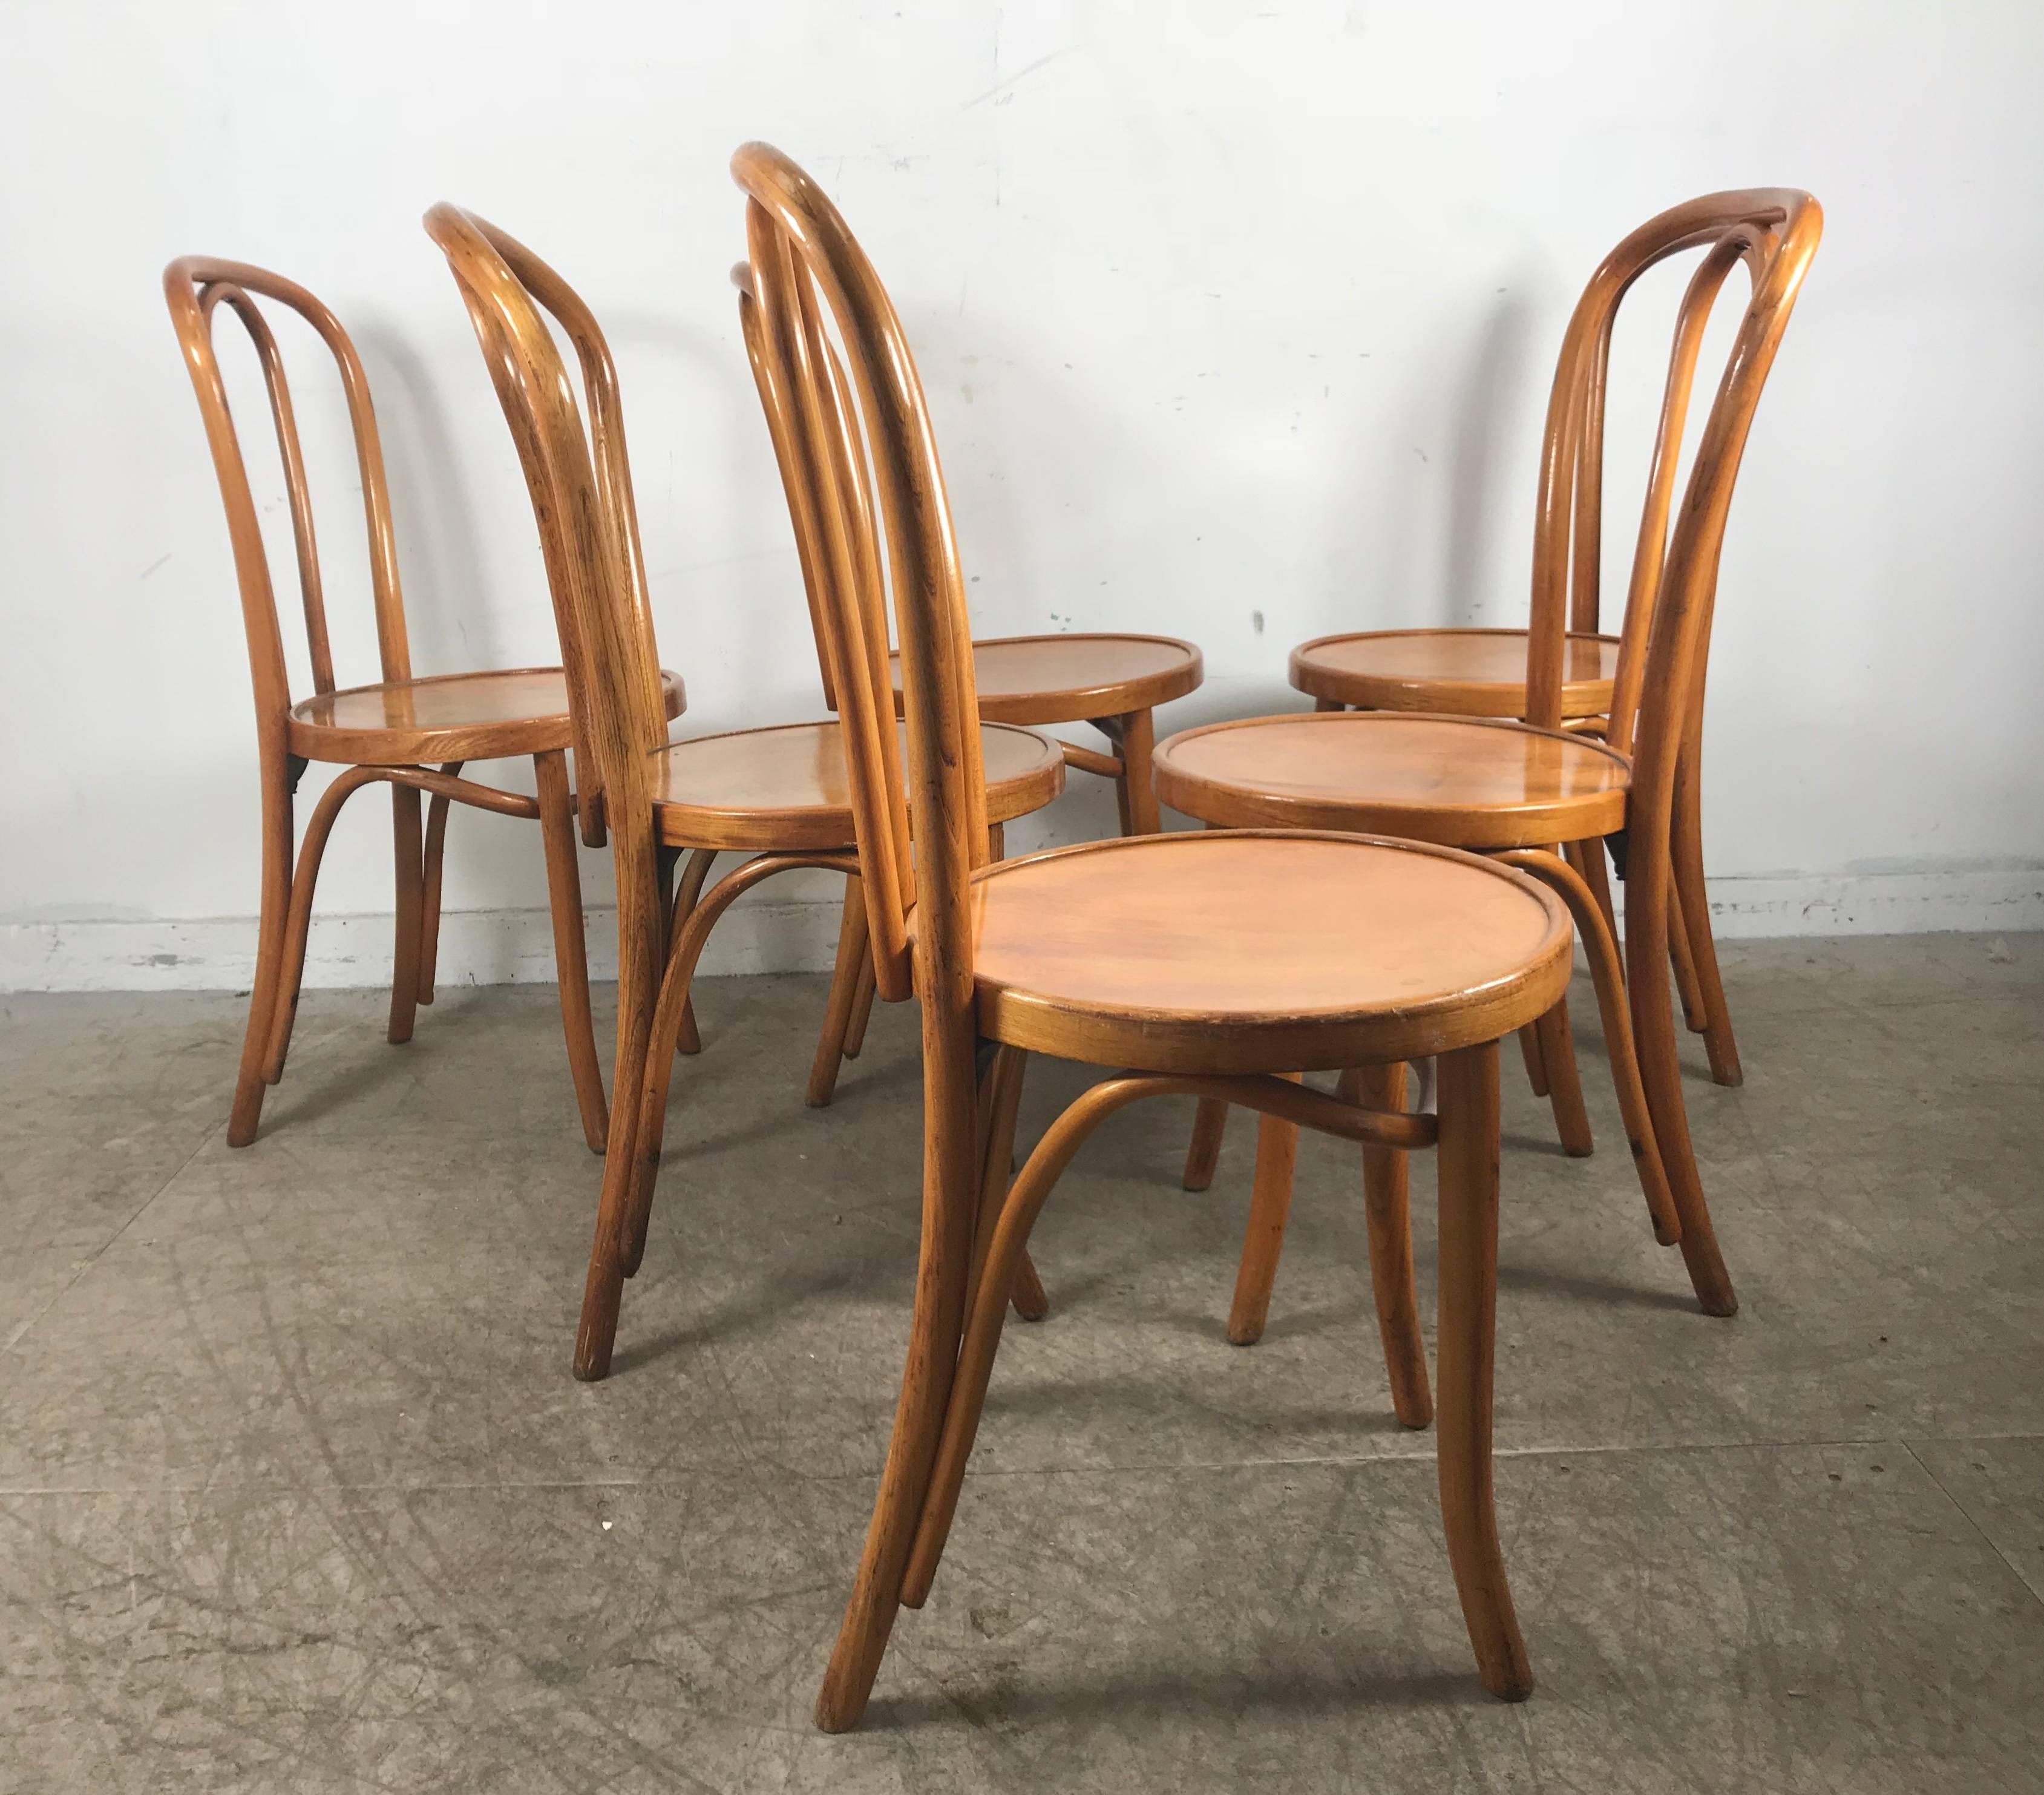 Vienna Secession Set of Six Classic American Bentwood Side Chairs by Thonet, New York